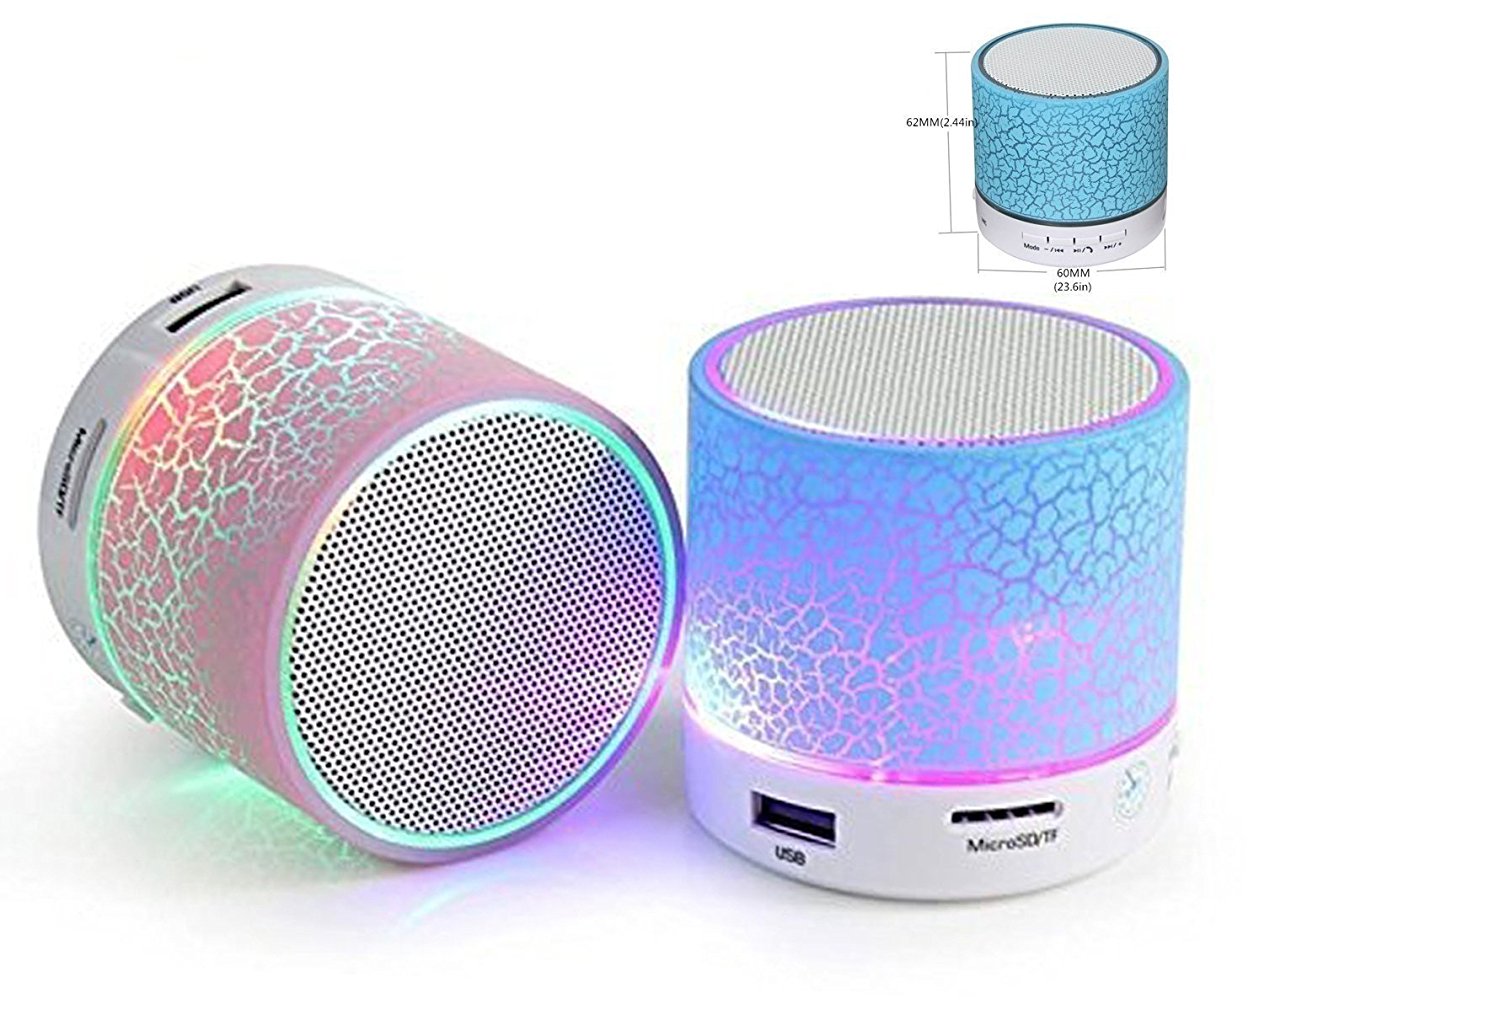 Padraig Wireless LED Bluetooth Speaker S10 Handfree with Calling Functions & FM Radio (Assorted Colour) Price in India